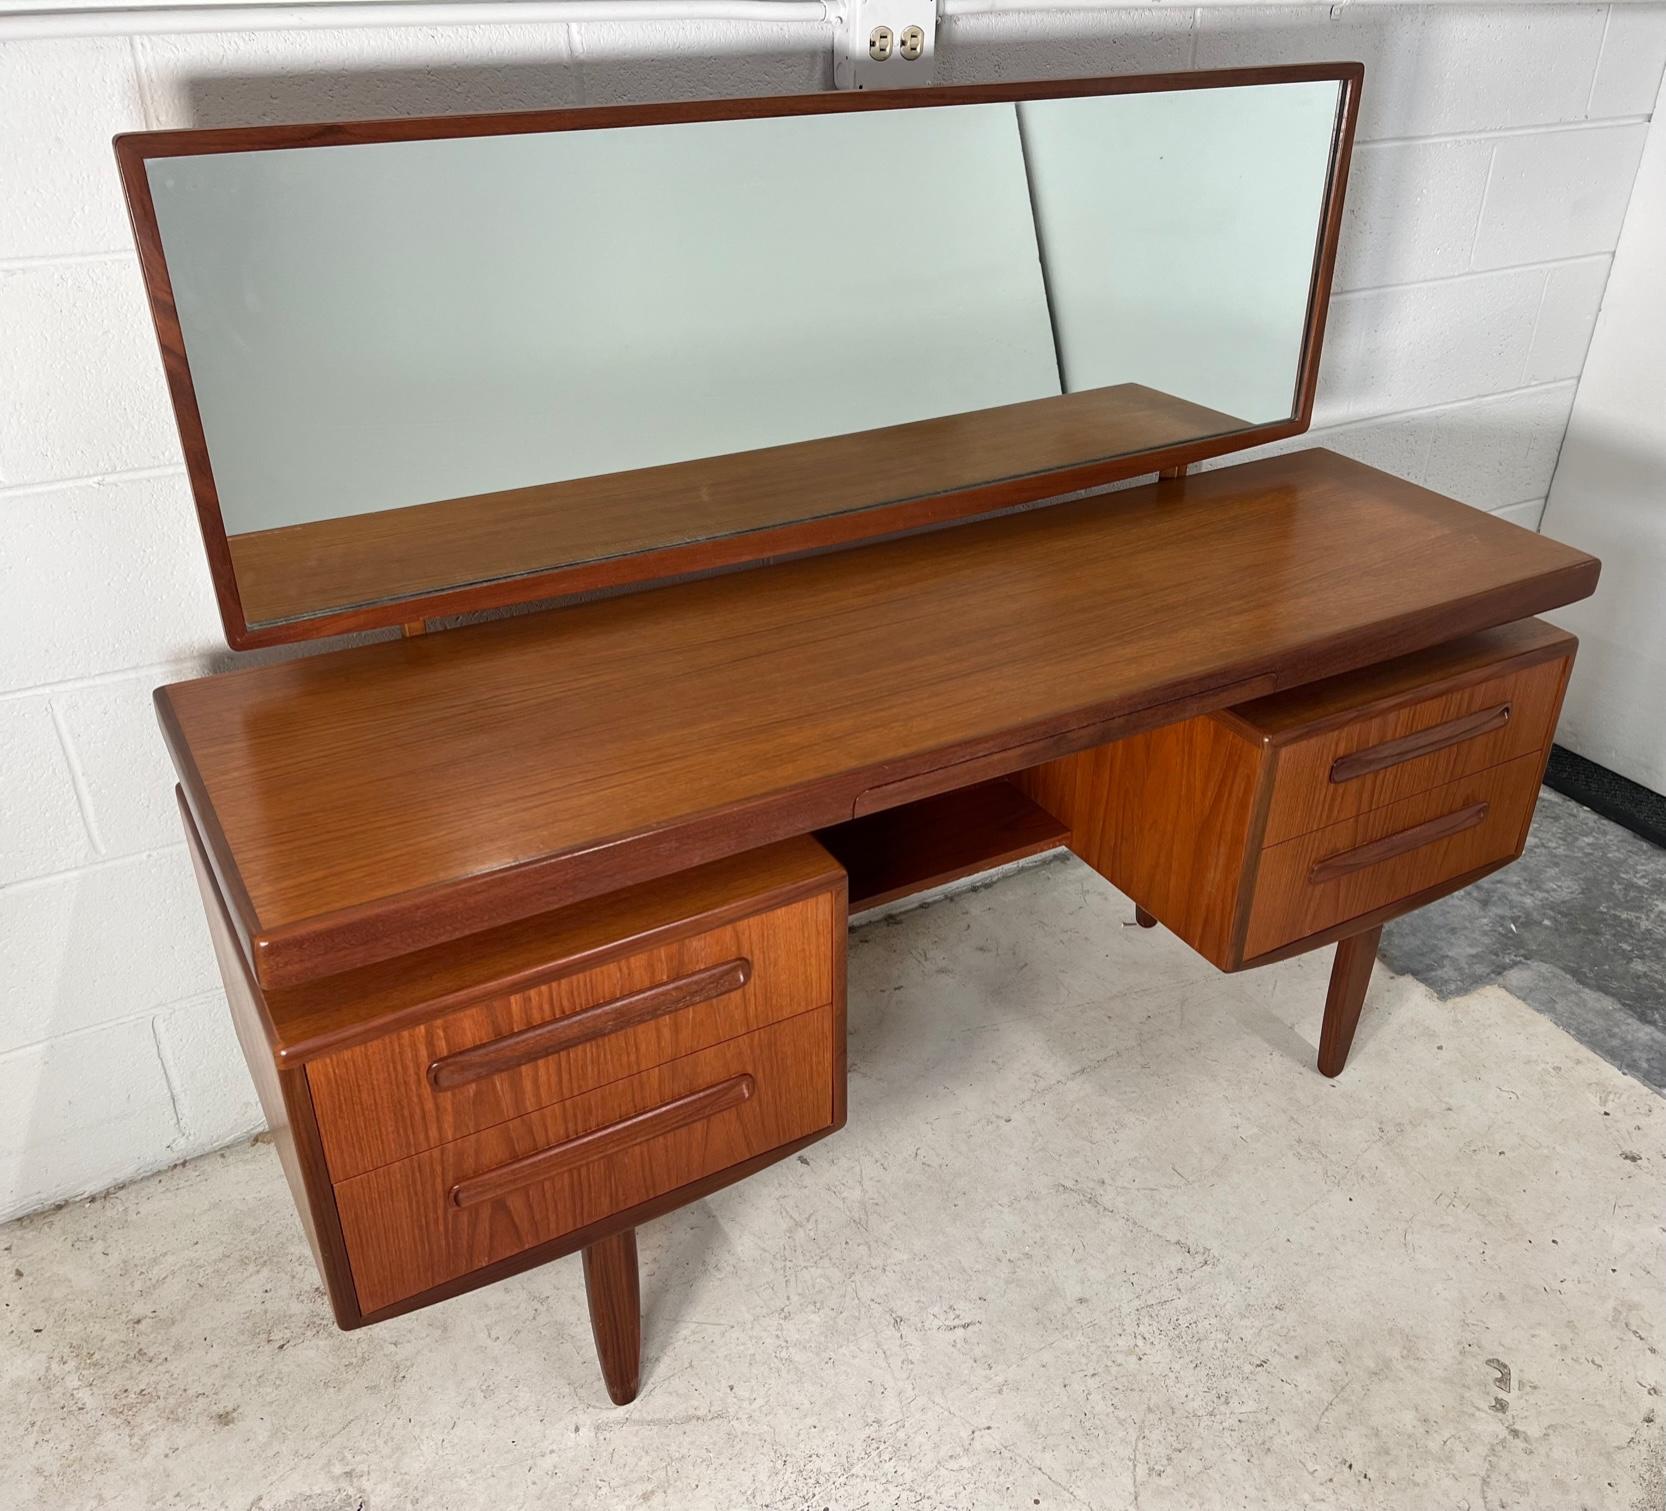 Fantastic mid-century teak vanity with stool. Designed in the 60s by Victor Bramwell Wilkins for G Plan's Fresco Range. Danish Modern in style. Secret drawer has original purple fabric. Gorgeous continuous grain pattern on the front of the drawers.